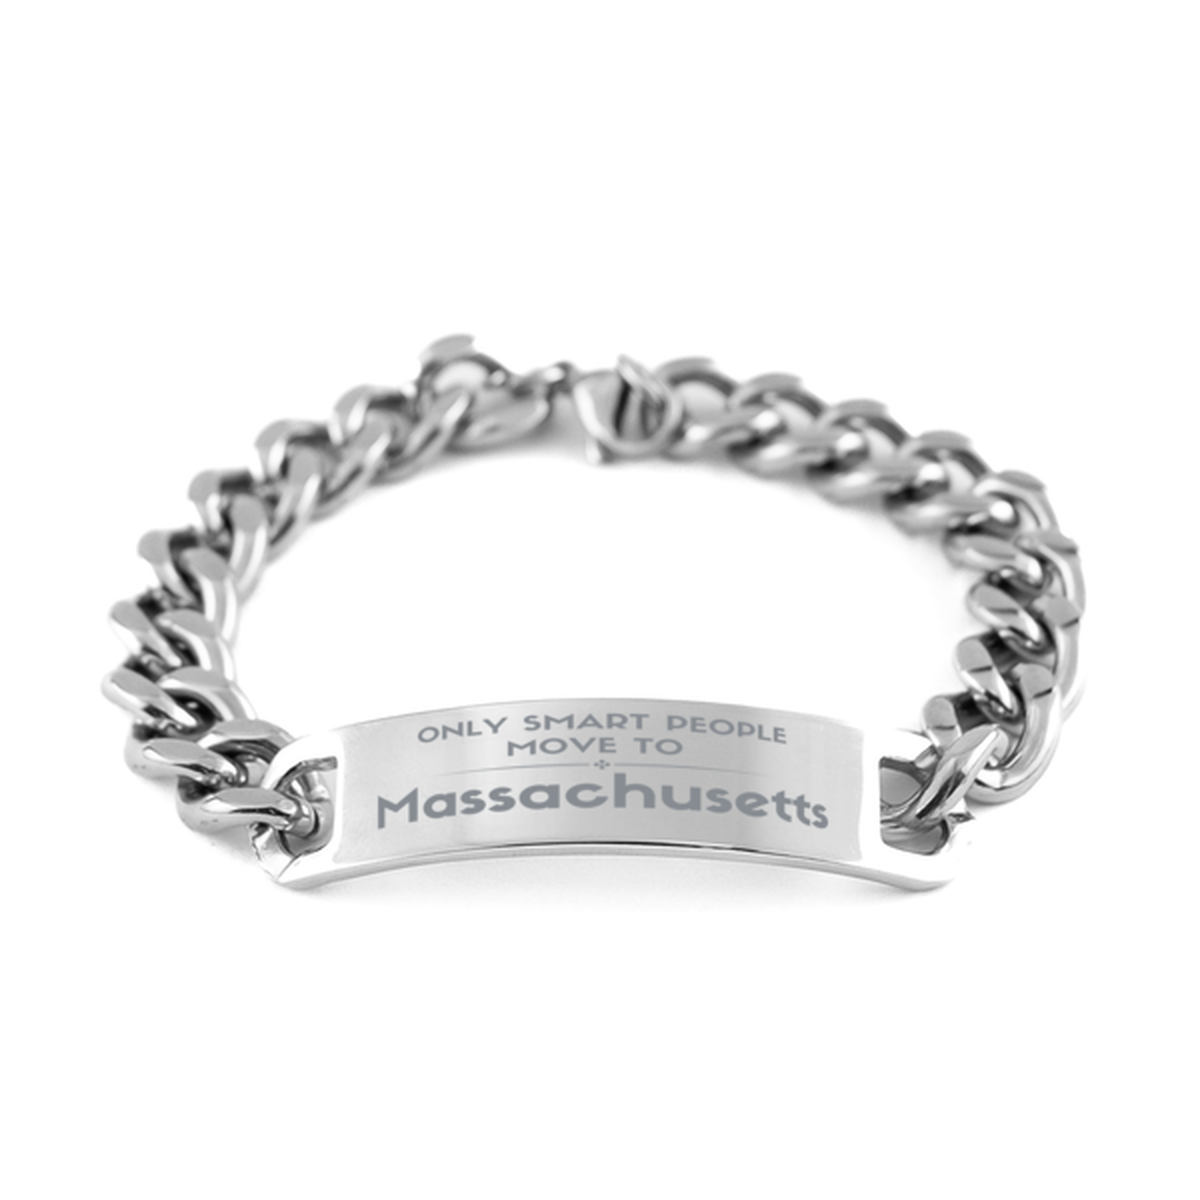 Only smart people move to Massachusetts Cuban Chain Stainless Steel Bracelet, Gag Gifts For Massachusetts, Move to Massachusetts Gifts for Friends Coworker Funny Saying Quote